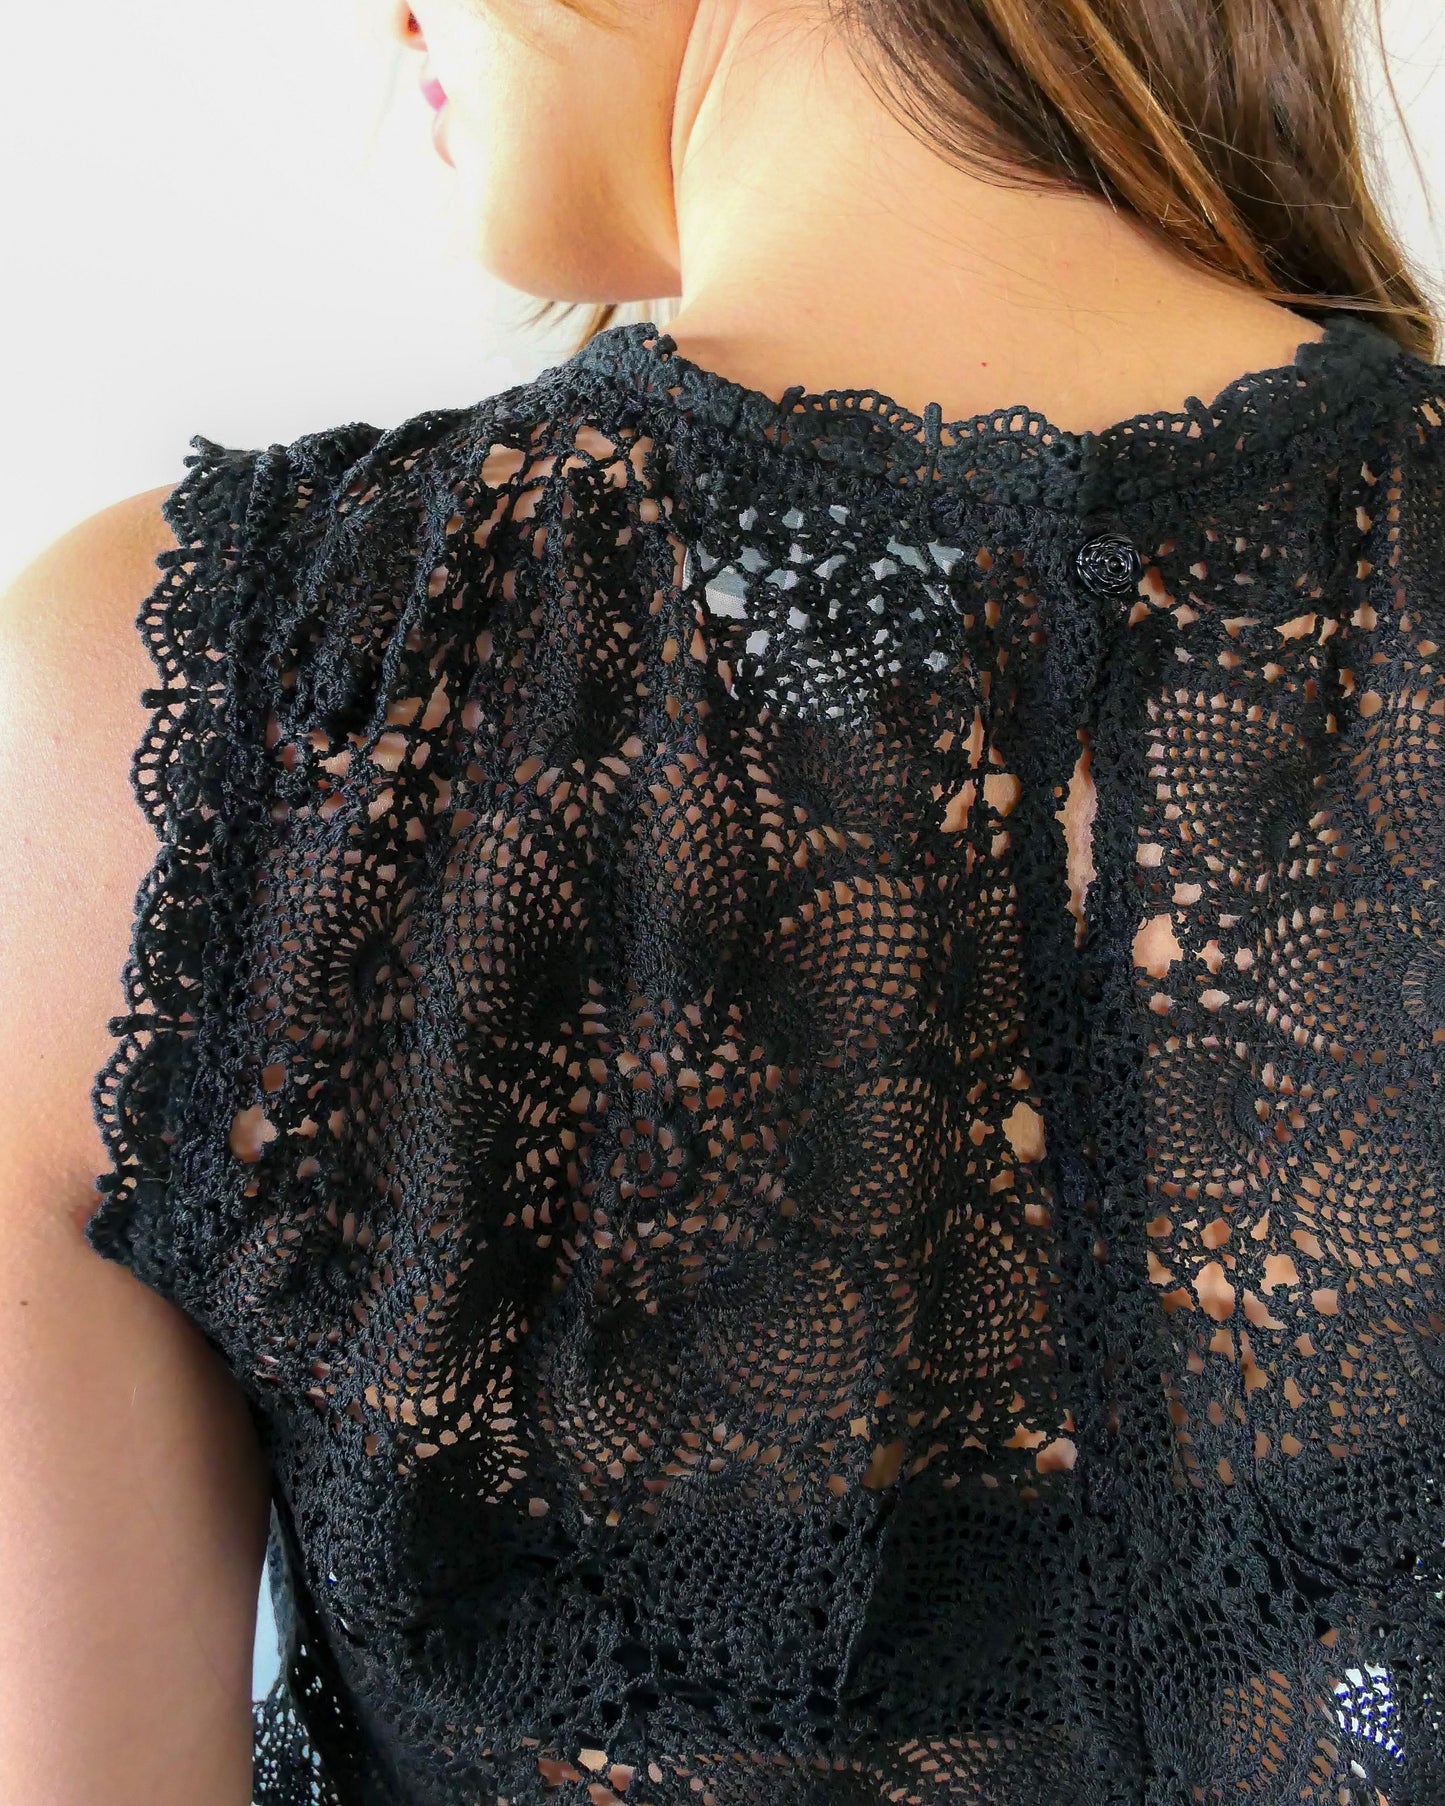 An ultra casual, hip, and boho-chic crop tank top made with interconnected flower doilies reminiscent of the white lotus, which symbolizes peace, tranquility, and calmness. Lace trim at the collar and sleeve. Model is wearing a black colored crochet Lim's Vintage top.